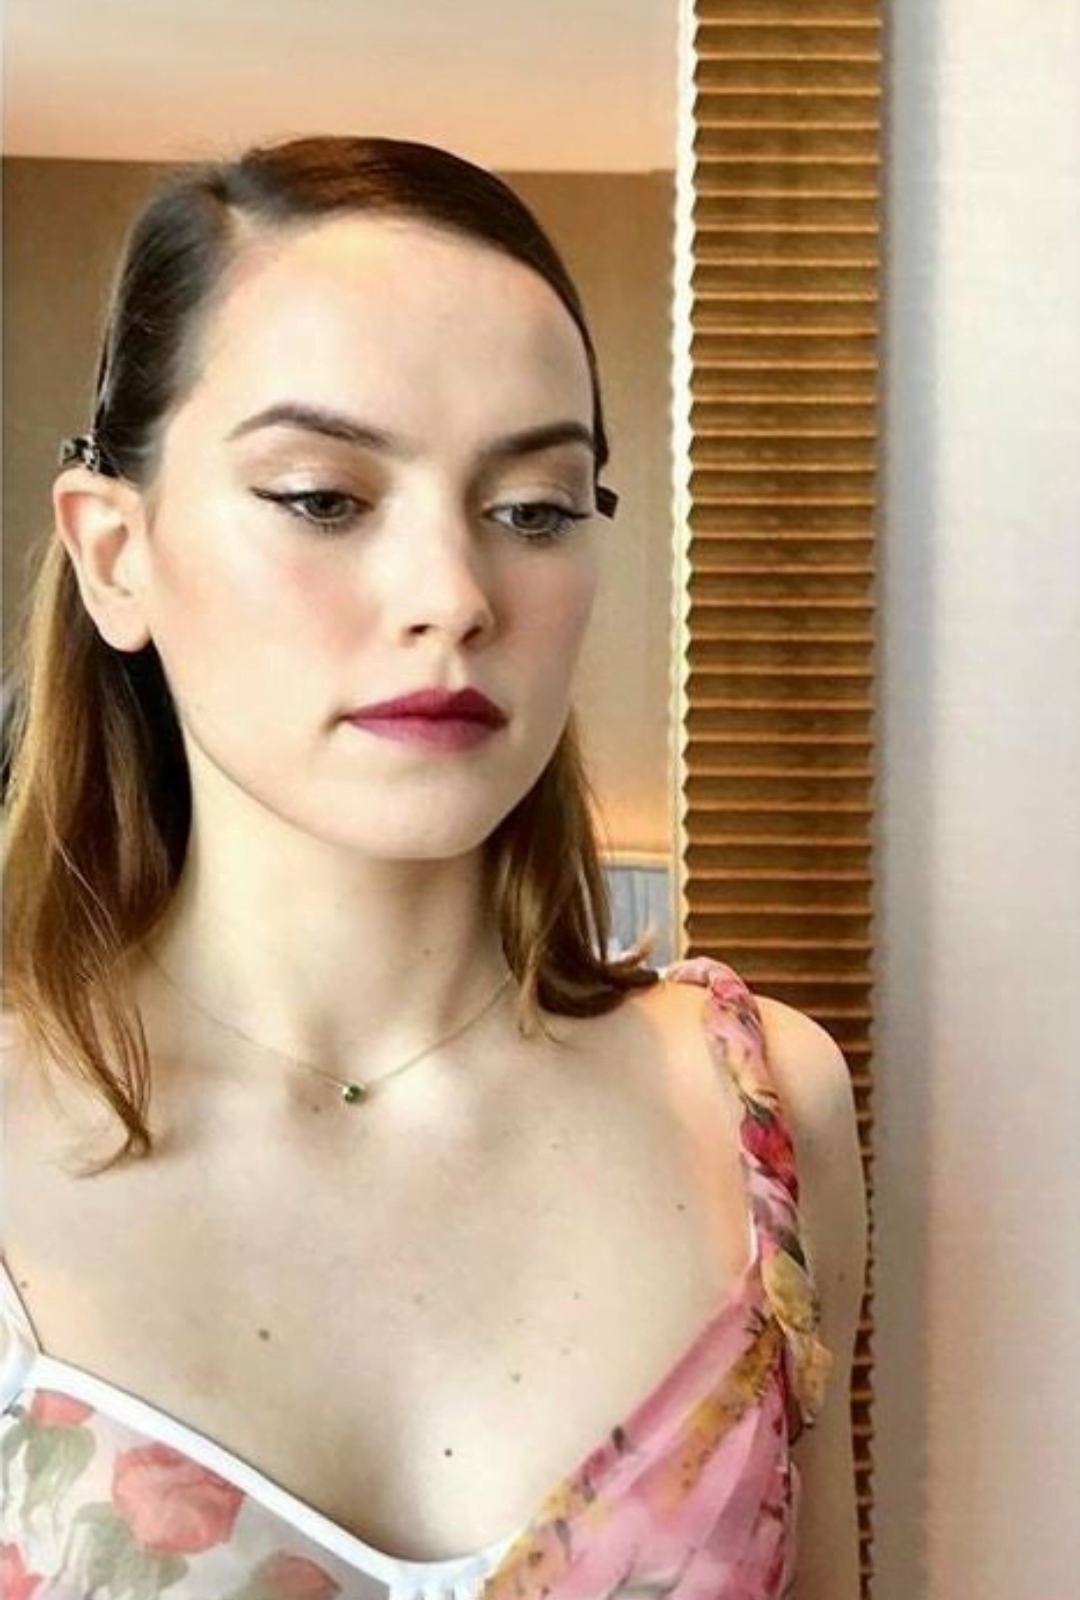 Daisy Ridley wants to know why you arent already on